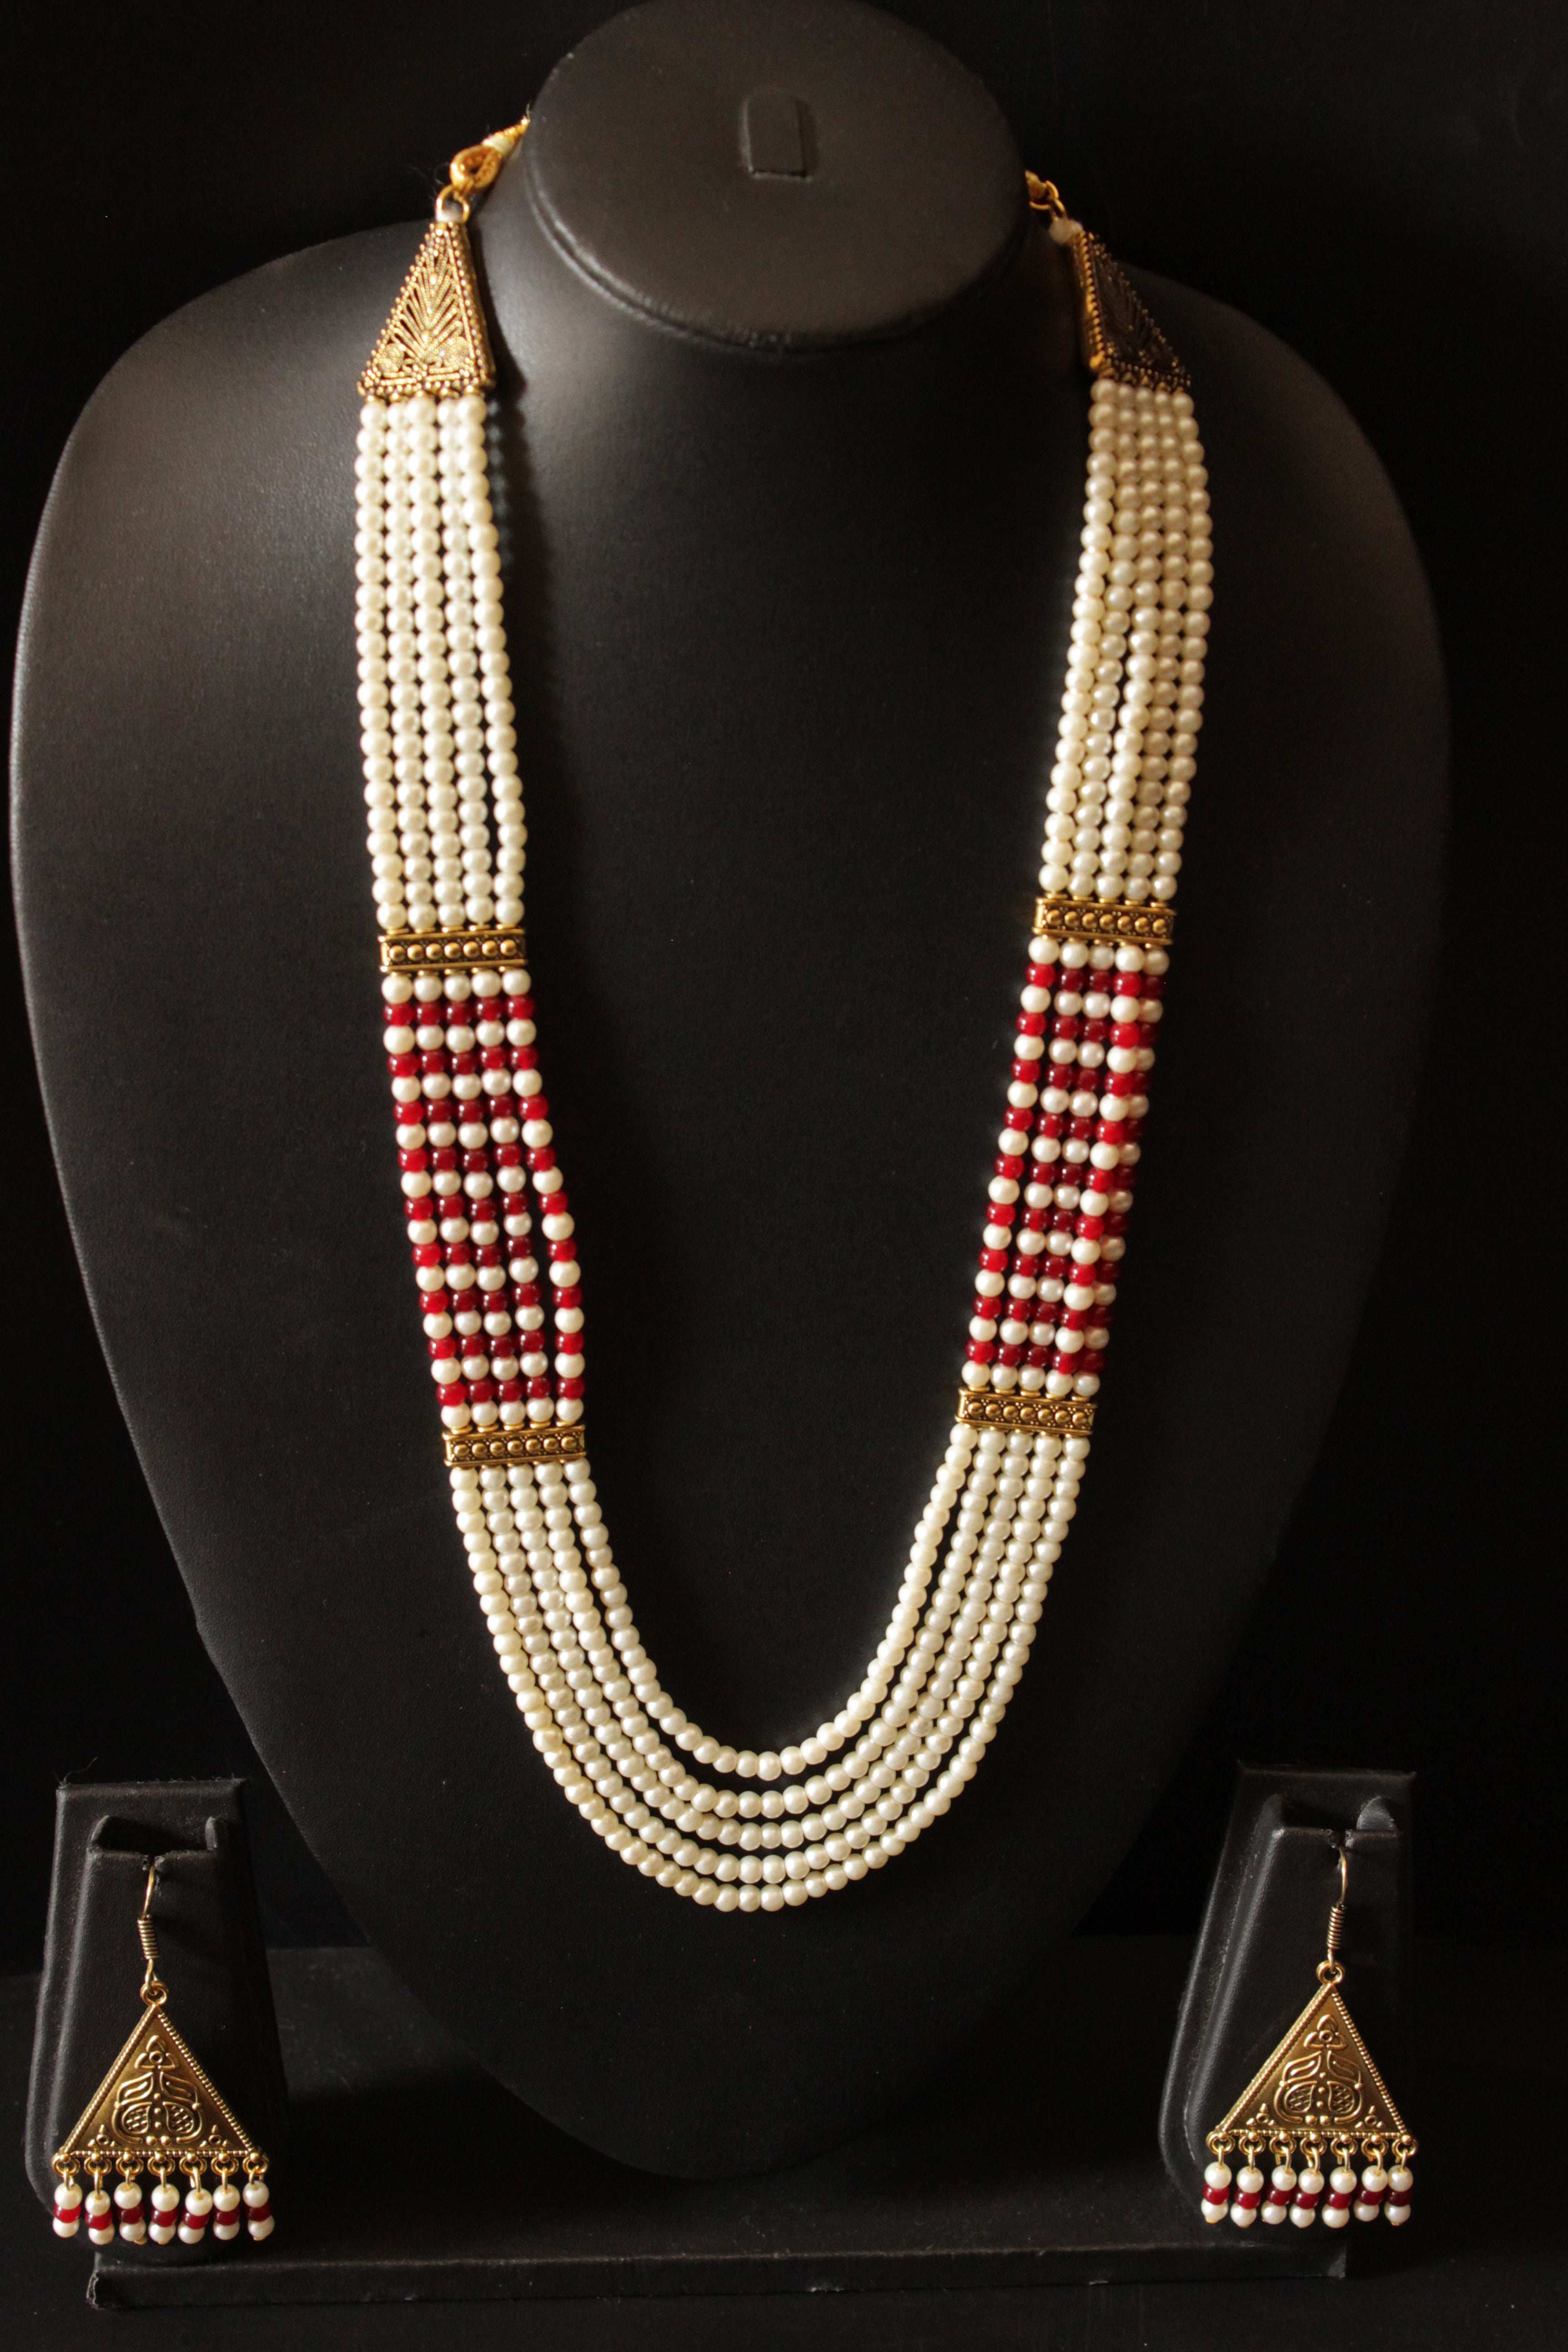 5 Layered White and Red Beads Necklace Set with Gold Finish Metal Accents